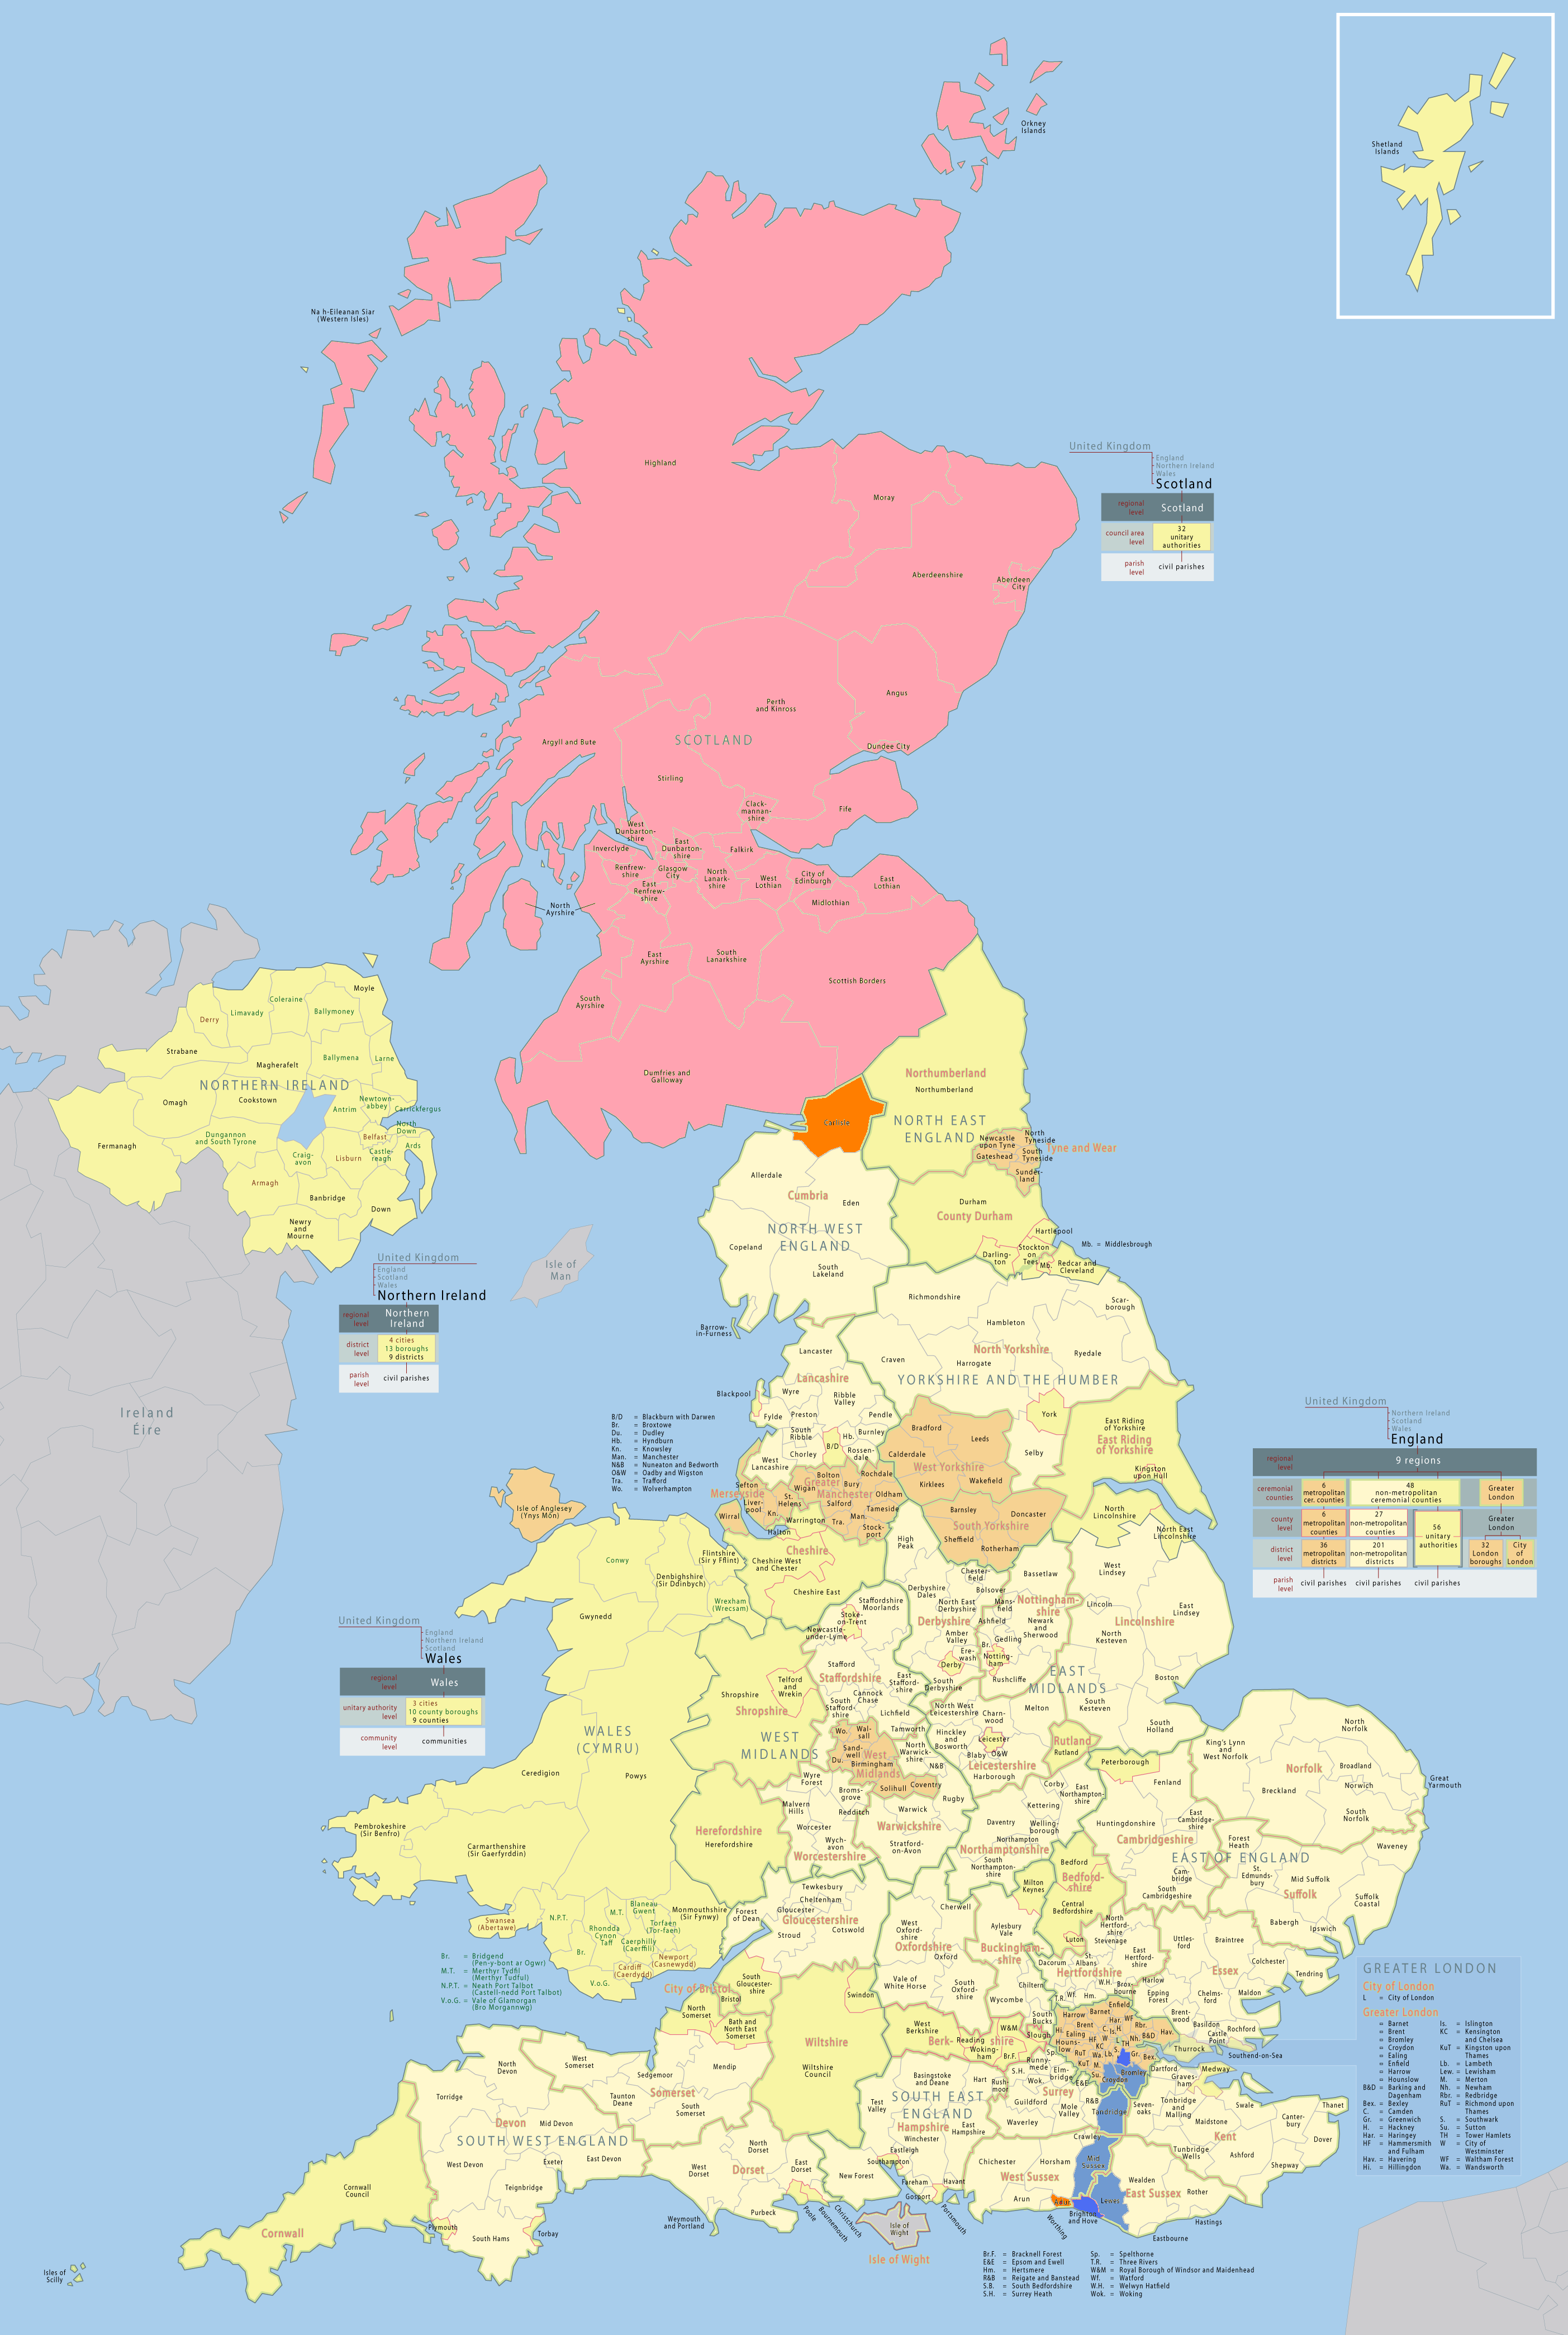 united kingdom (night of the living alternate history map game)